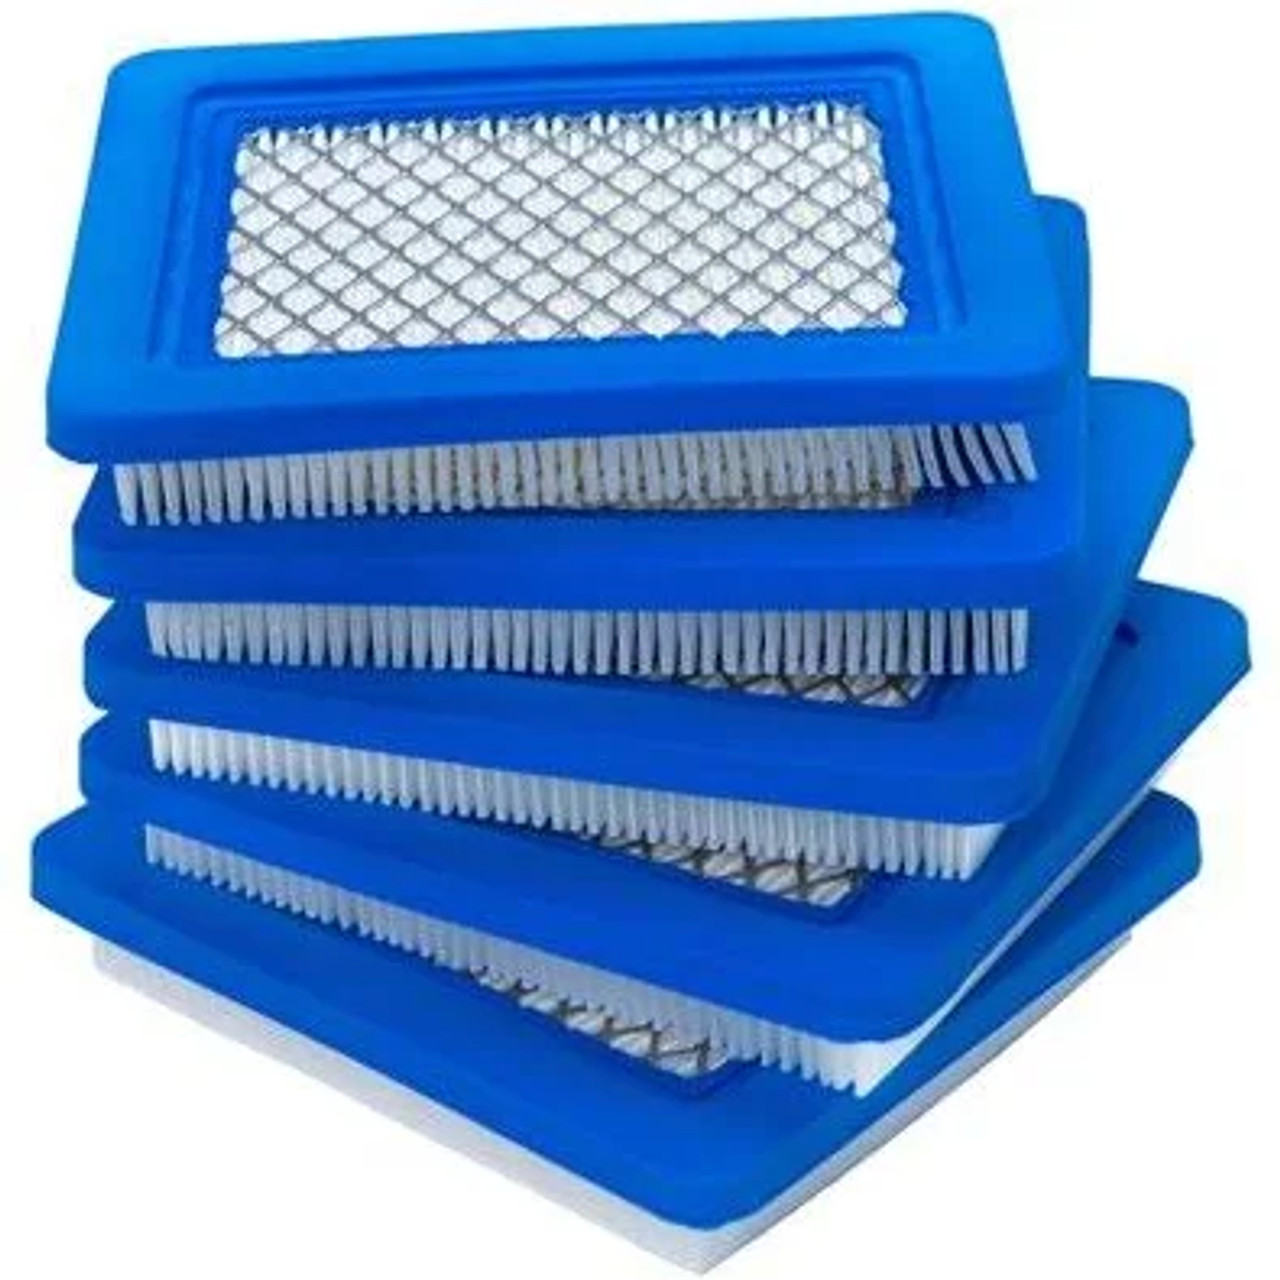 Coolmade 491588s Air Filter, Compatible for Briggs and Stratton Flat Cartridge 491588 491588s 5043 119-1909, Premium Lawn Mower Cleaner 5 Pack, Blue